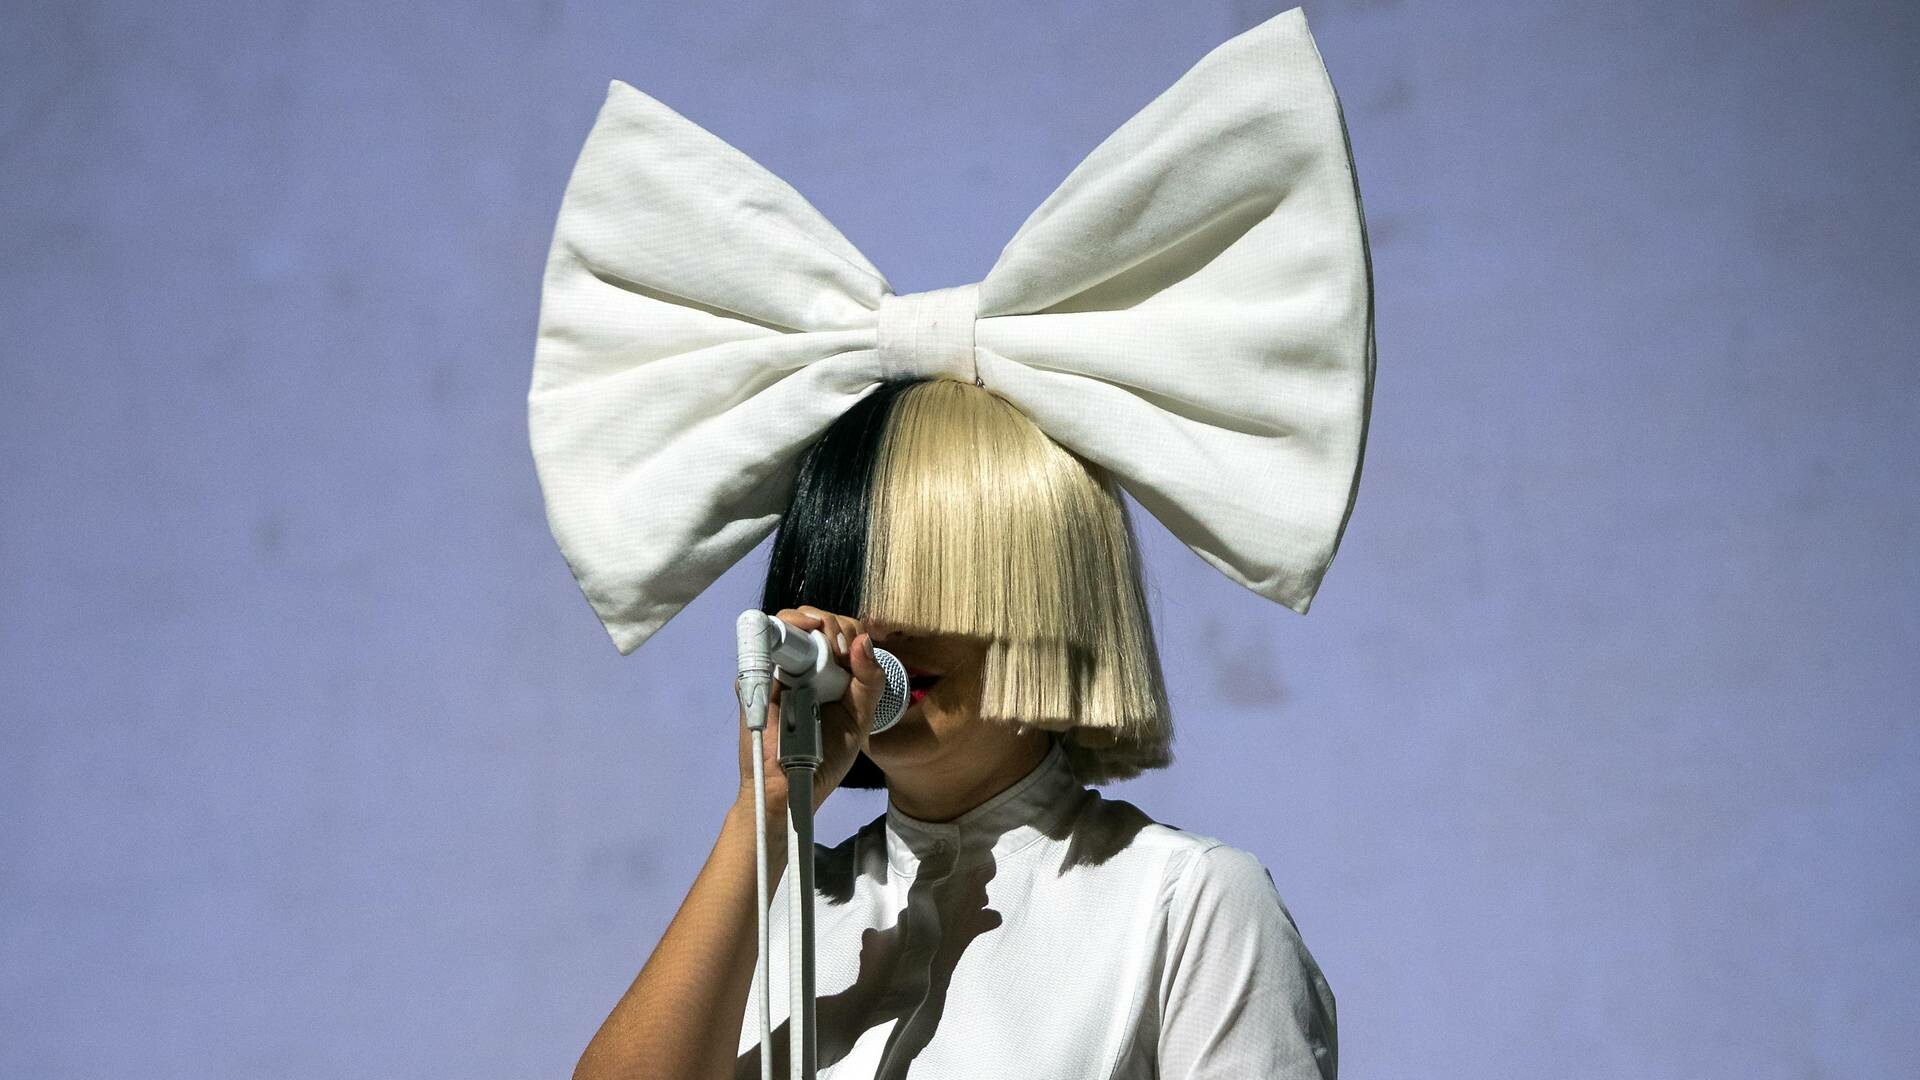 Sia: "Soon We'll Be Found" was released on 13 October 2008. 1920x1080 Full HD Wallpaper.